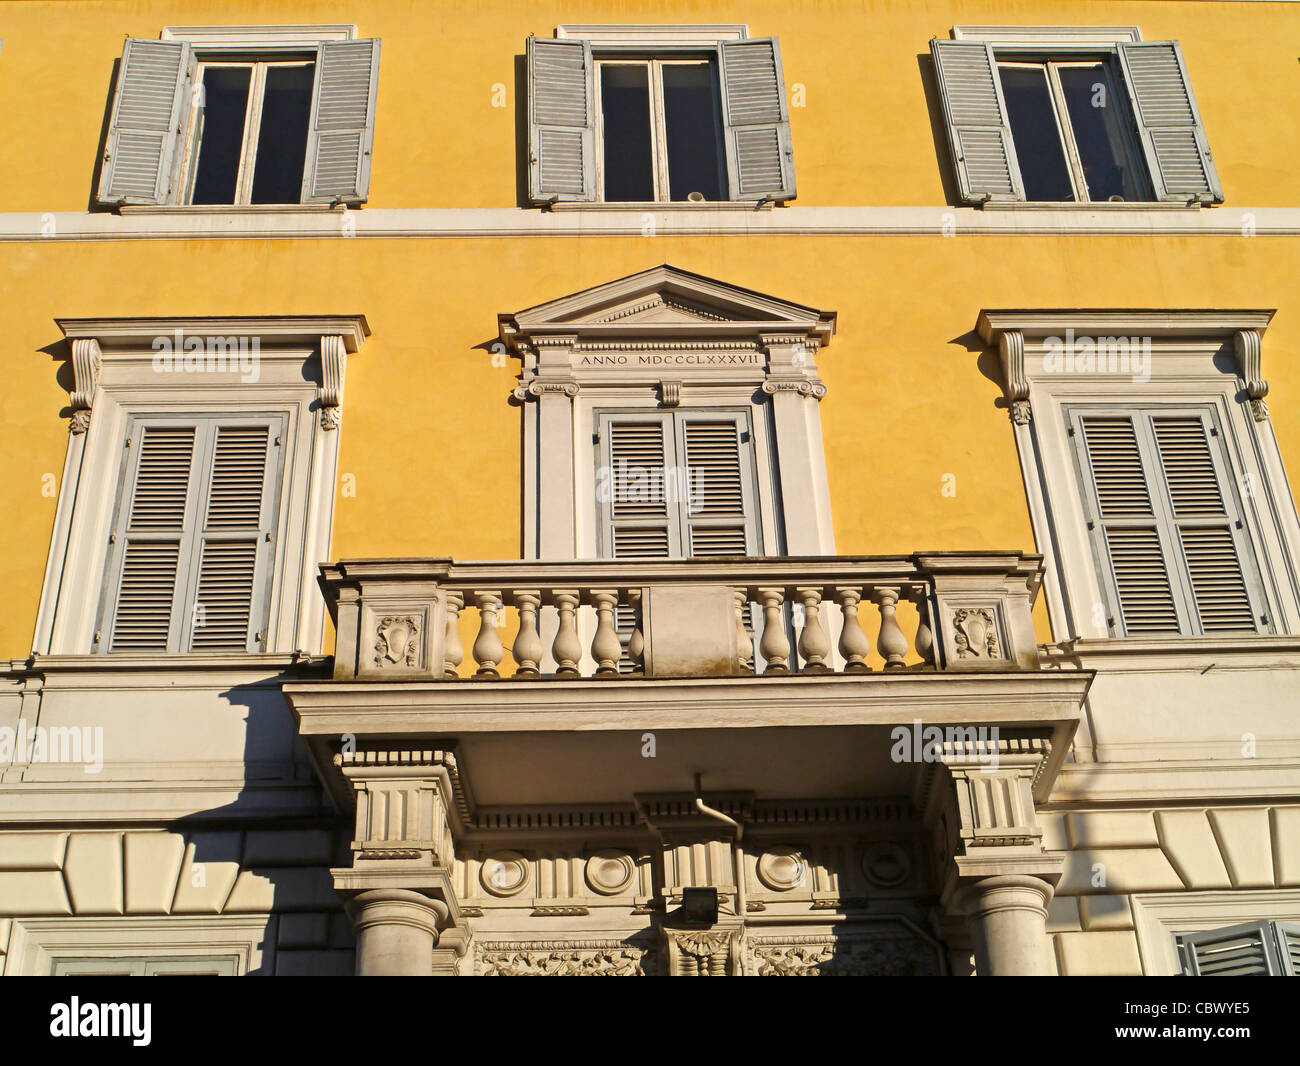 Rome, apartment building facade with ornate balcony Stock Photo